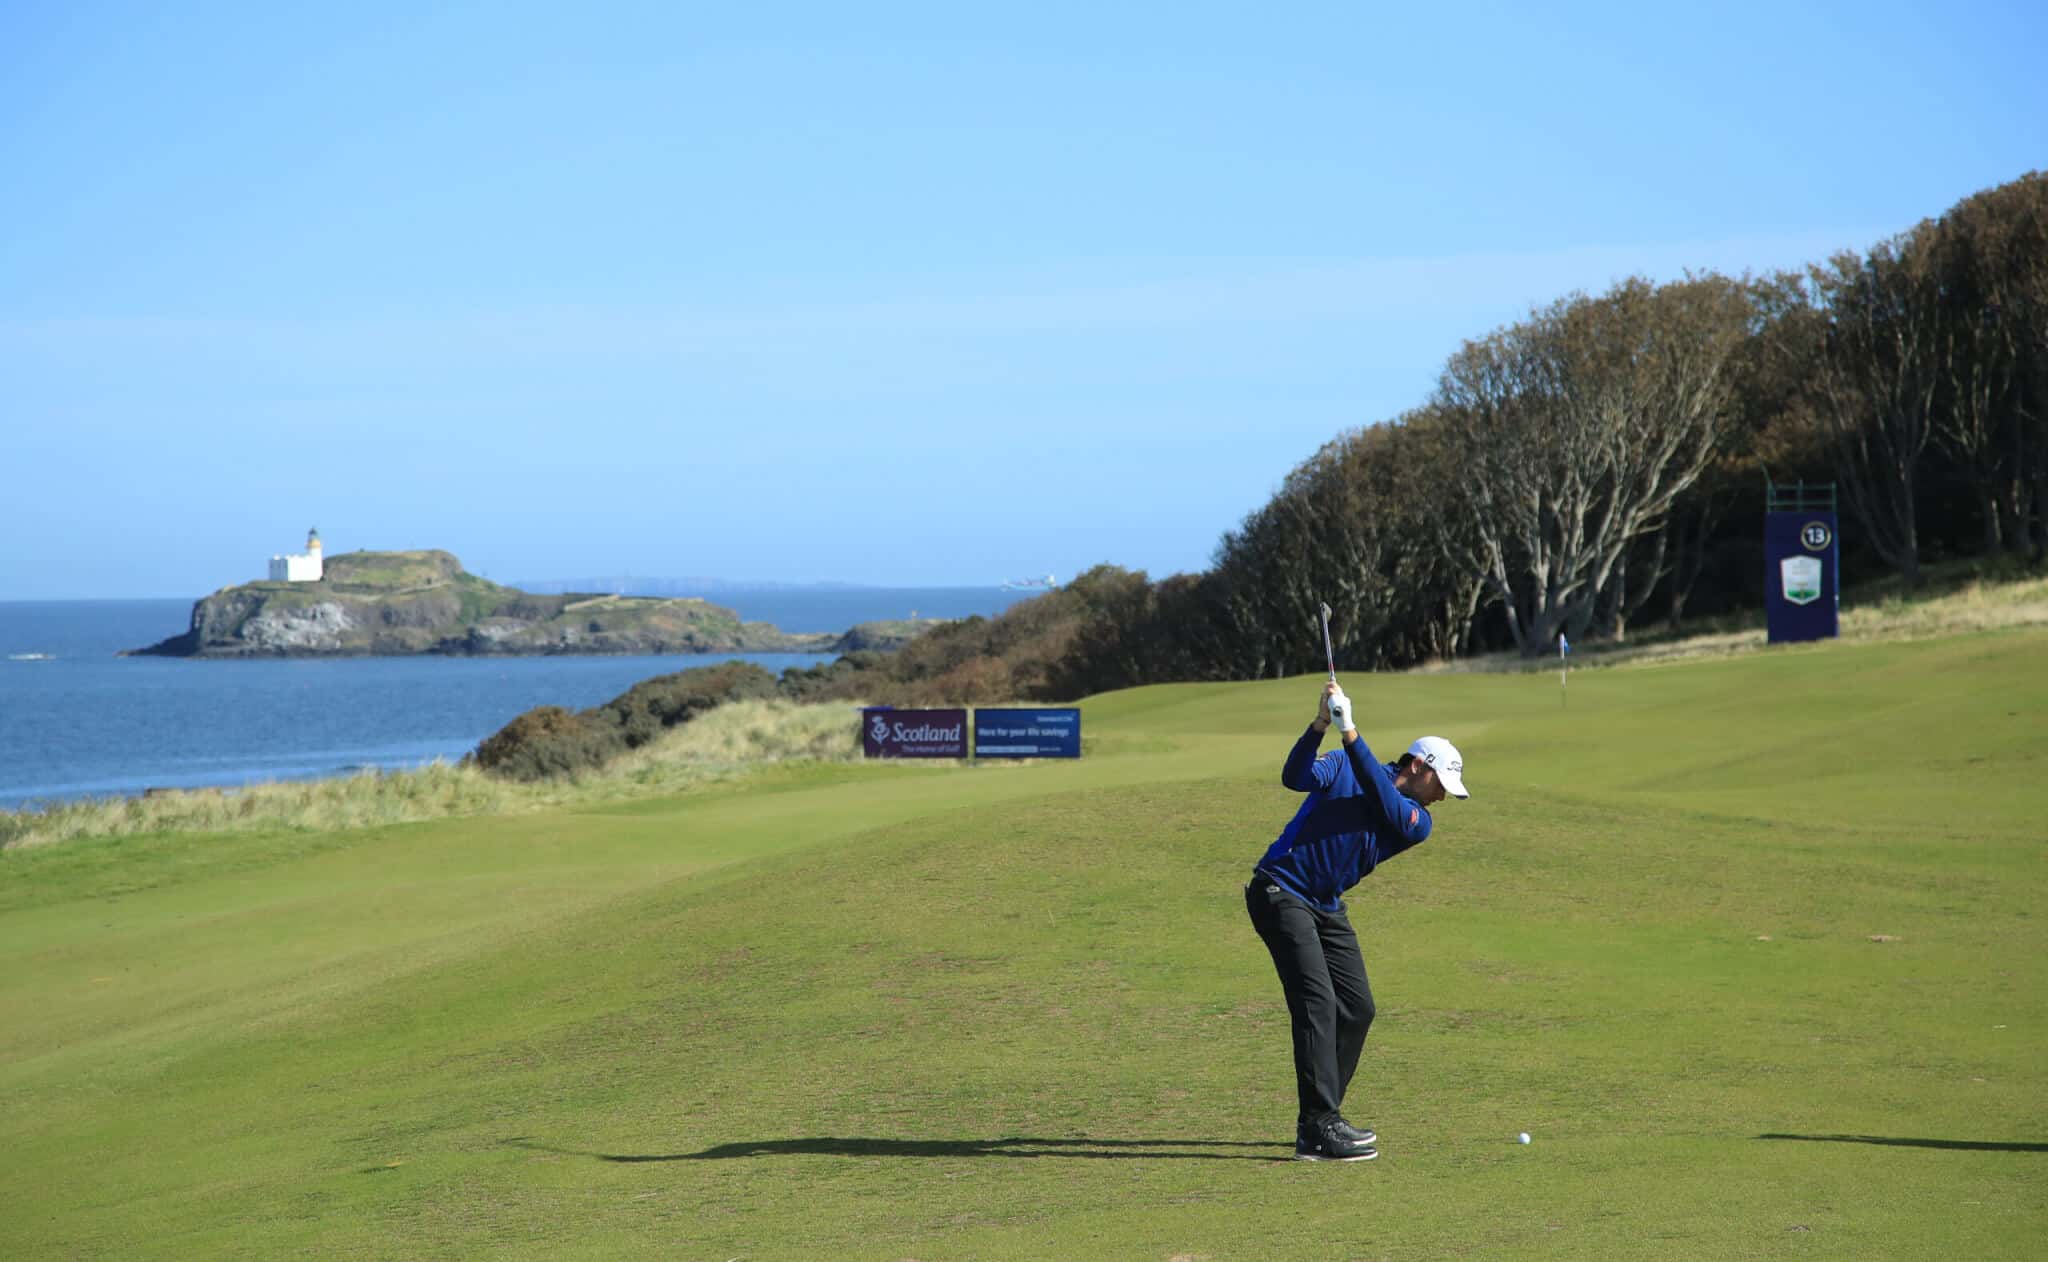 NORTH BERWICK, SCOTLAND - SEPTEMBER 29: Julien Guerrier of France plays his second shot on the 13th hole during a practice round prior to the start of the Aberdeen Standard Investments Scottish Open at The Renaissance Club on September 29, 2020 in North Berwick, Scotland. (Photo by Andrew Redington/Getty Images)